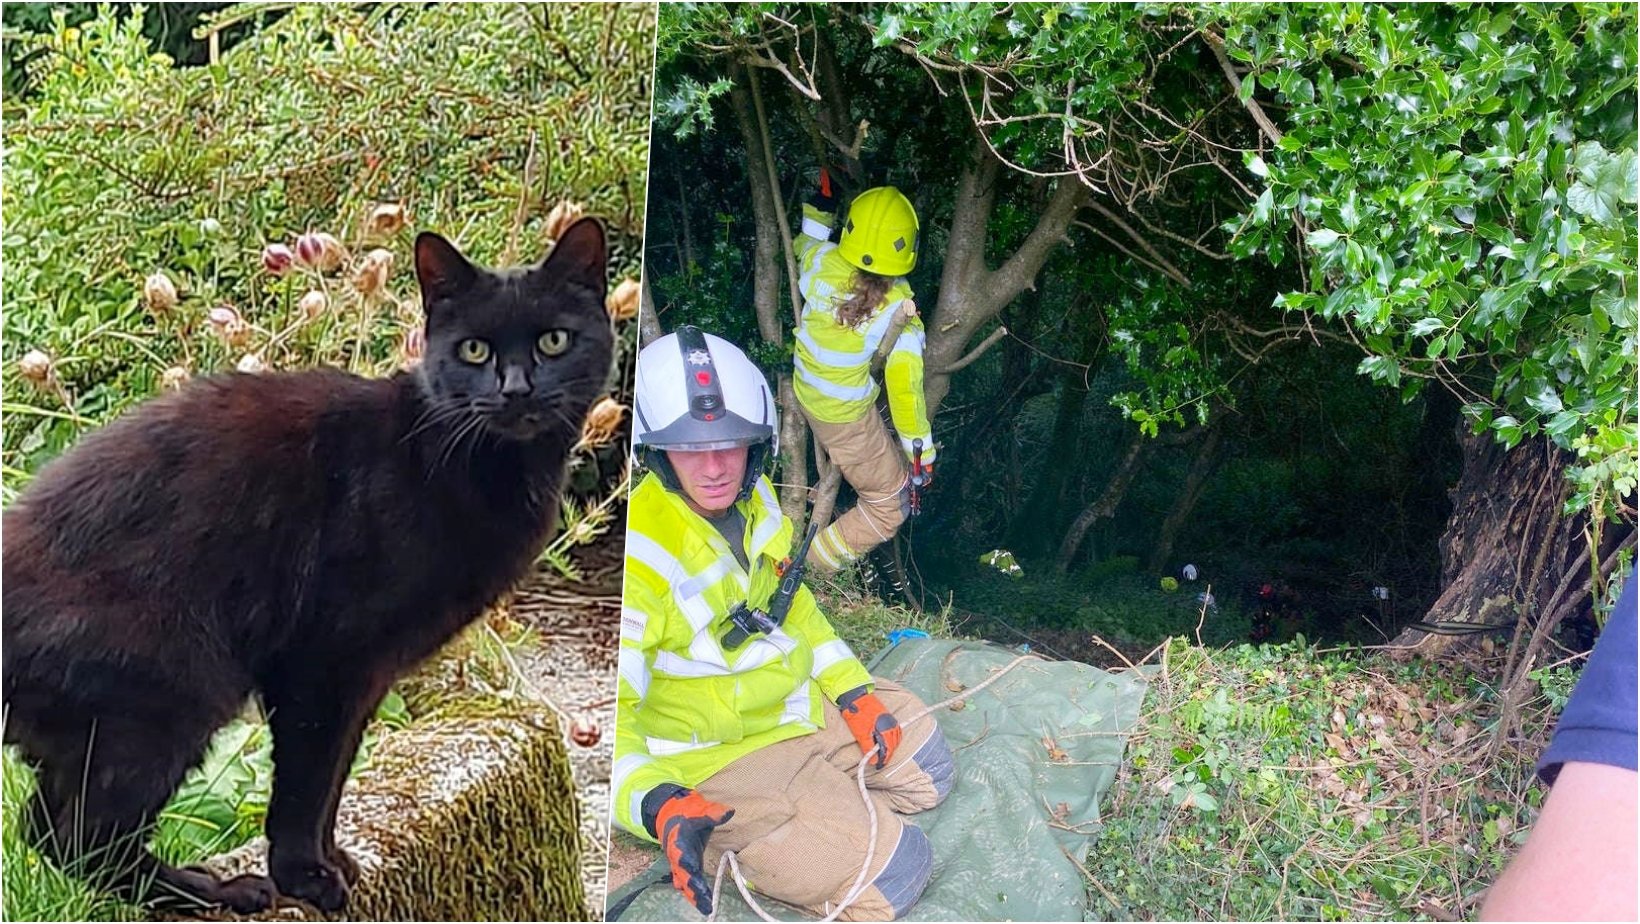 6 facebook cover 21.jpg?resize=1200,630 - Elderly Woman Helplessly Fell Into A Valley, But Her CAT Came To Her Aid & Alerted The Neighbors To Locate Her